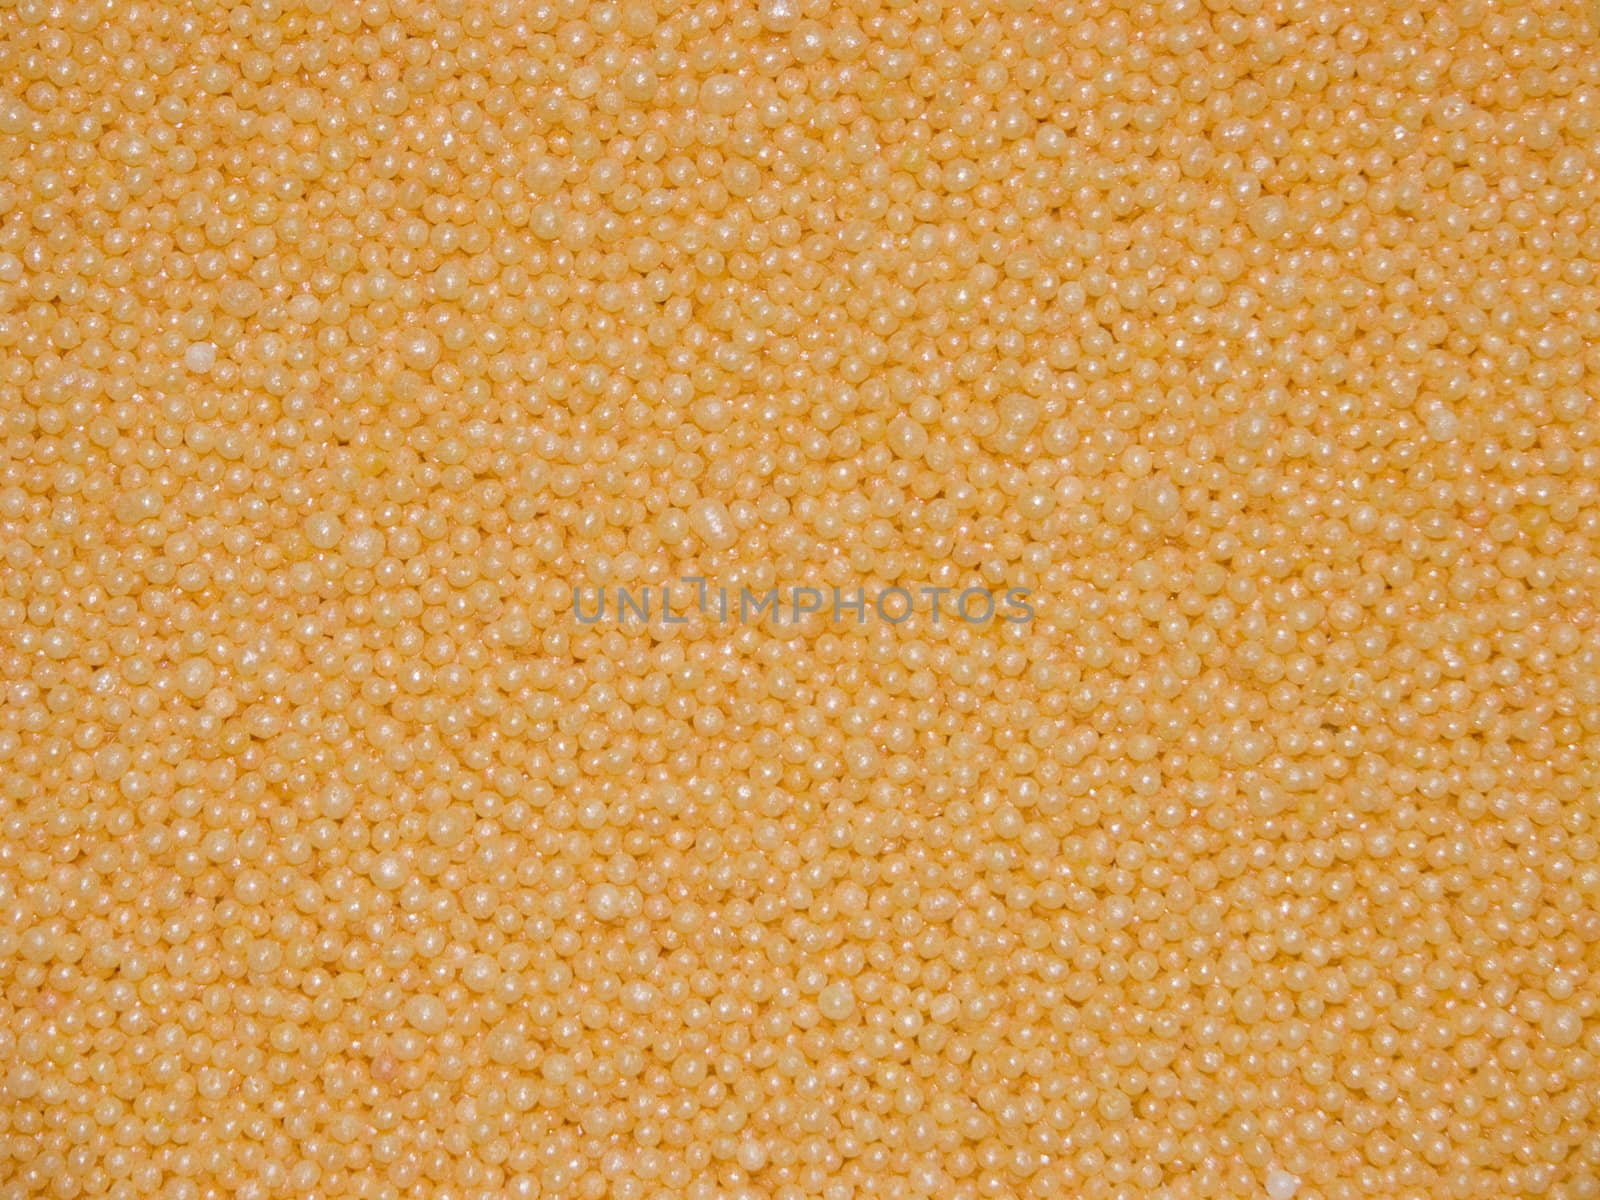 A background consisting of small granules of yellow colour